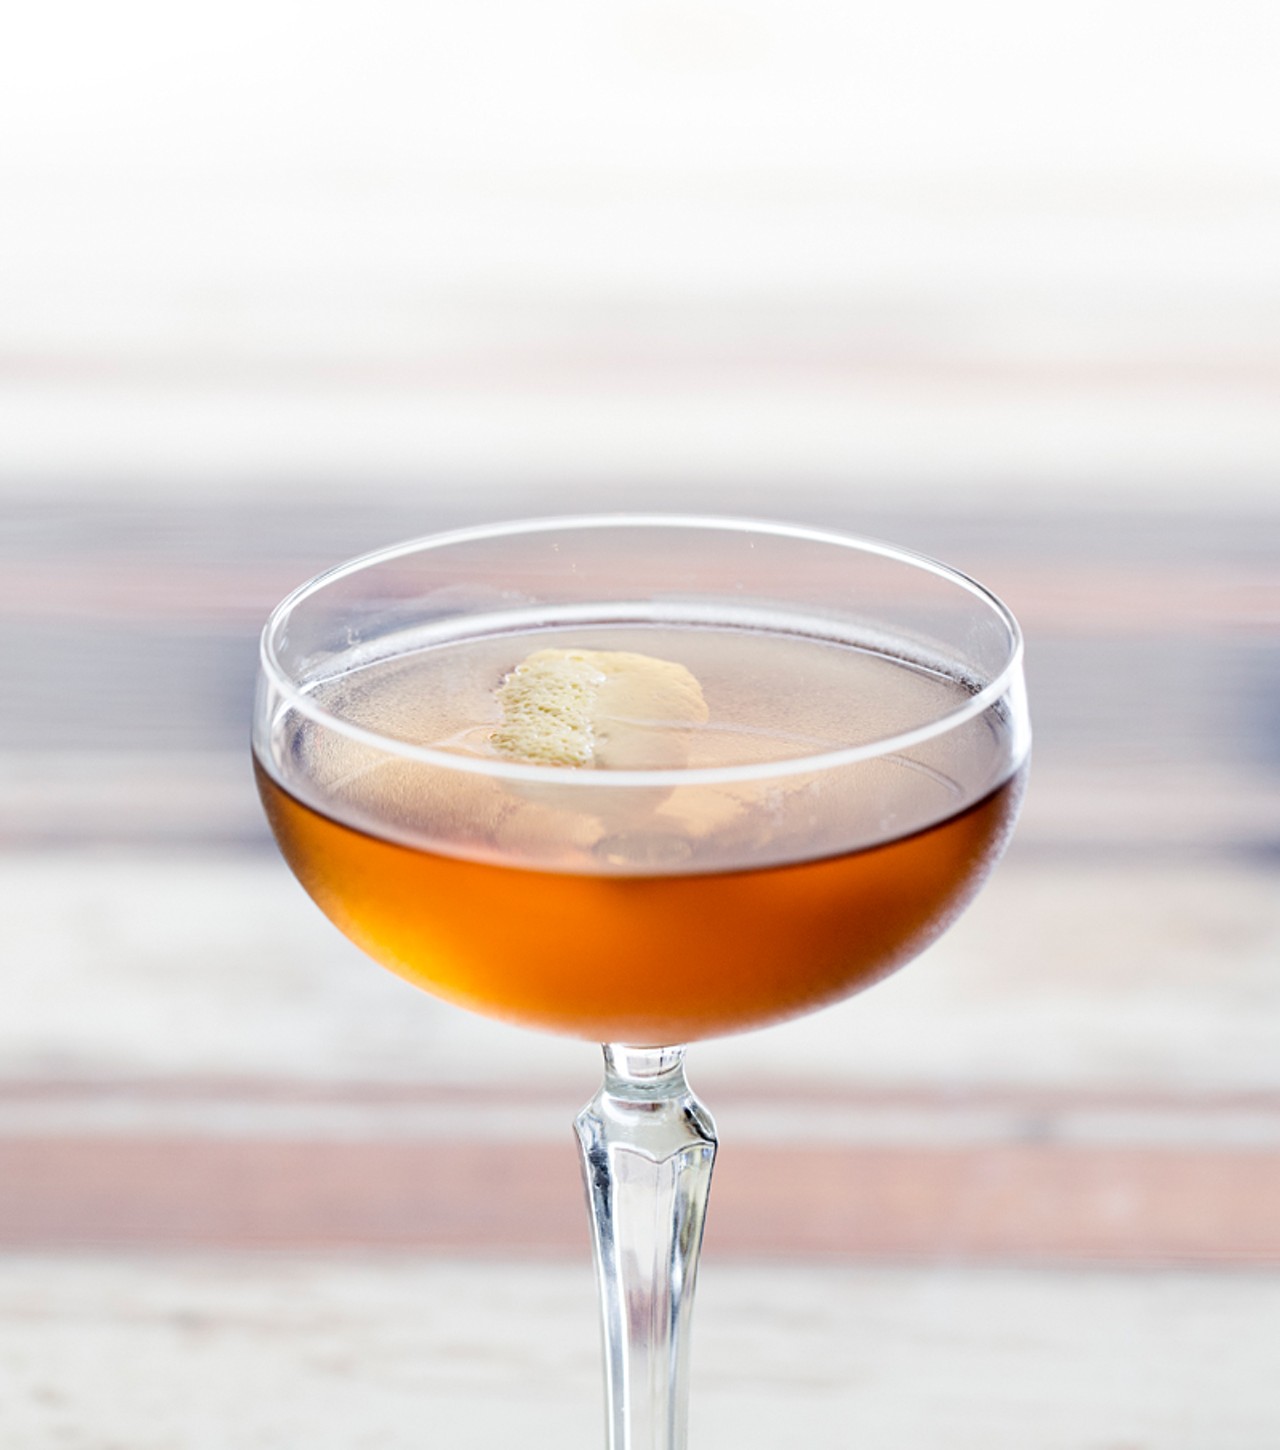 The "Bourbon Reforms" is made with bourbon, Missouri moonshine, sweet vermouth, benedictine and habanero shrub bitters.